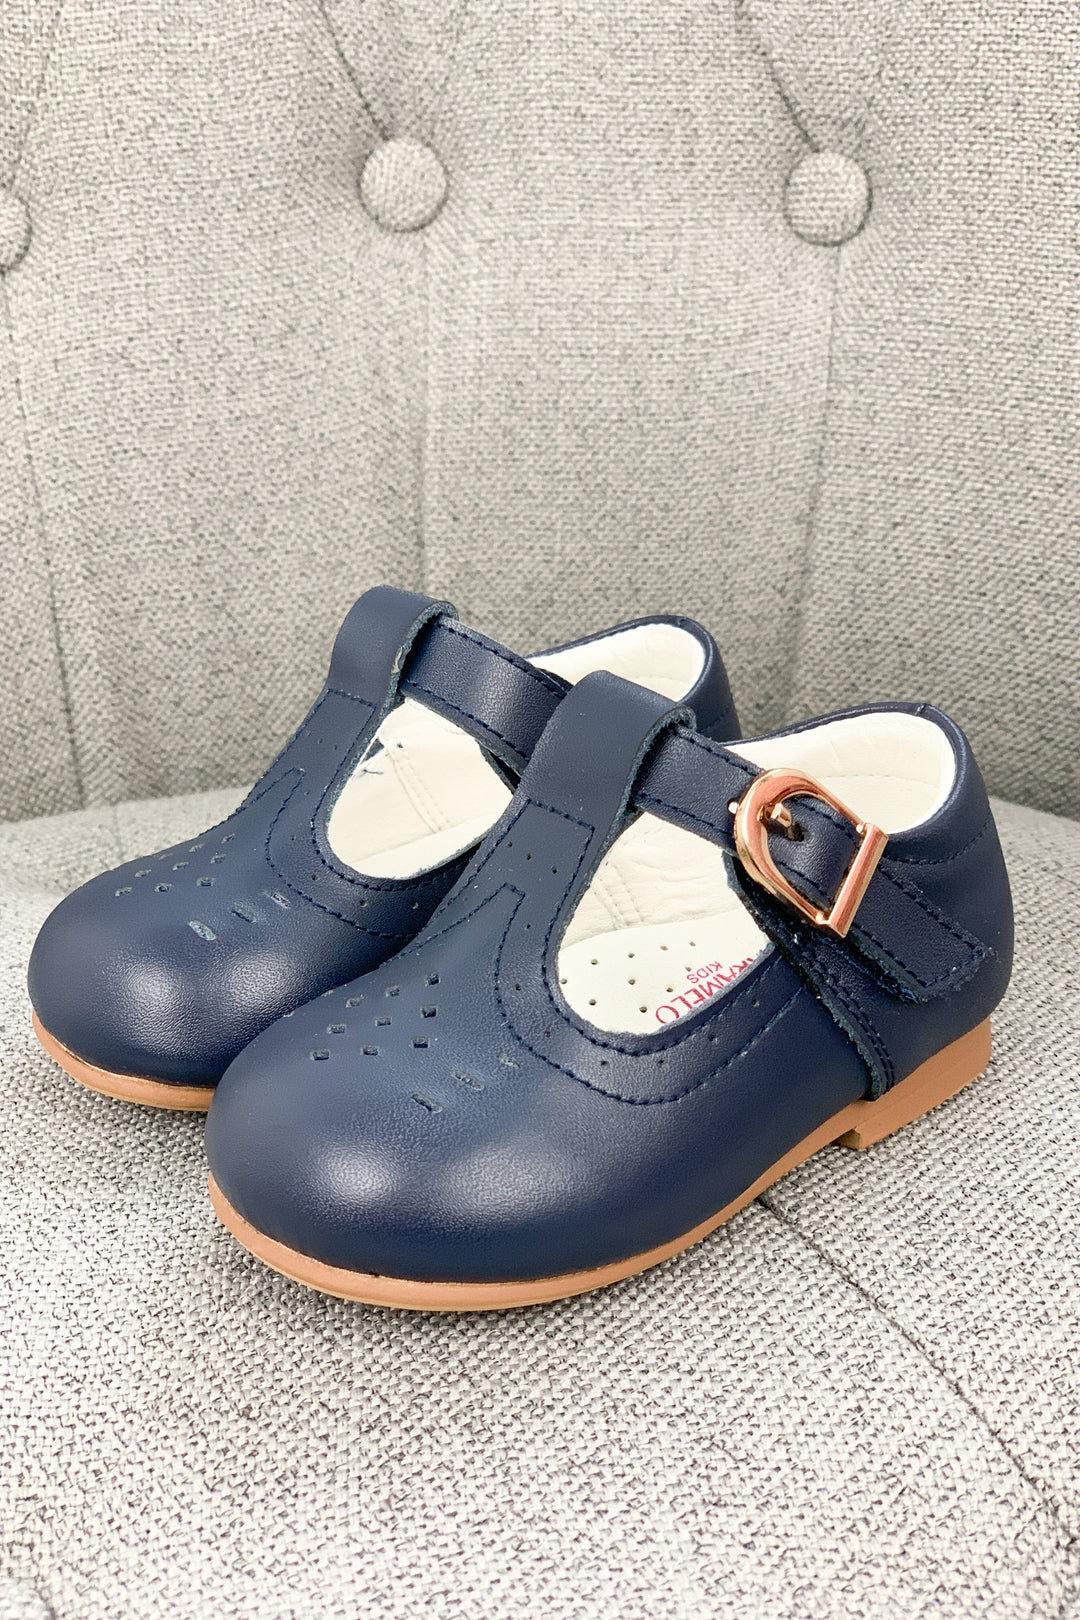 Caramelo Kids "Lucas" Leather T-Bar Shoes | Millie and John